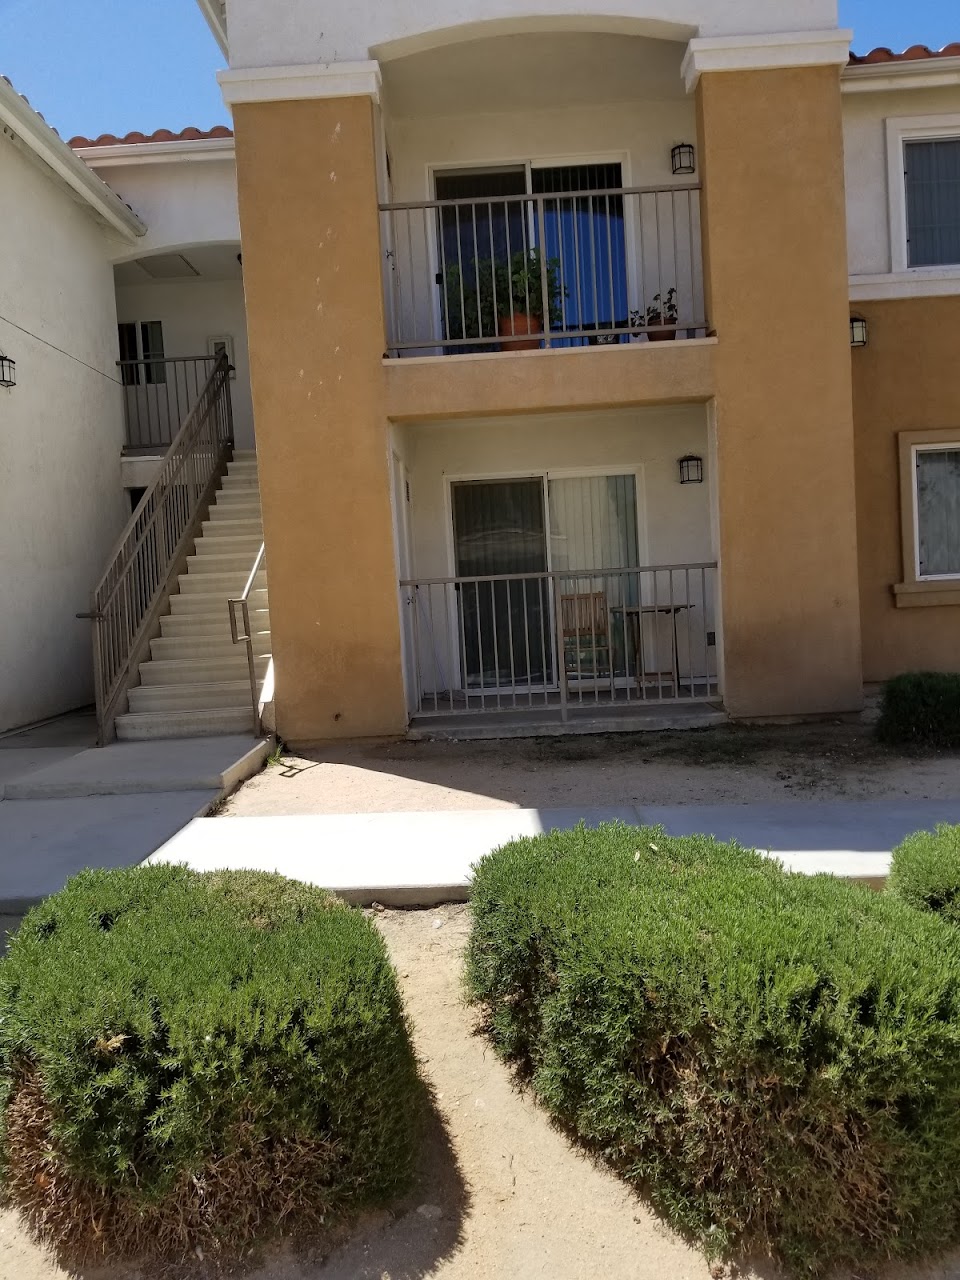 Photo of CASA BELLA APTS 2. Affordable housing located at 16980 NISQUALLI RD VICTORVILLE, CA 92395